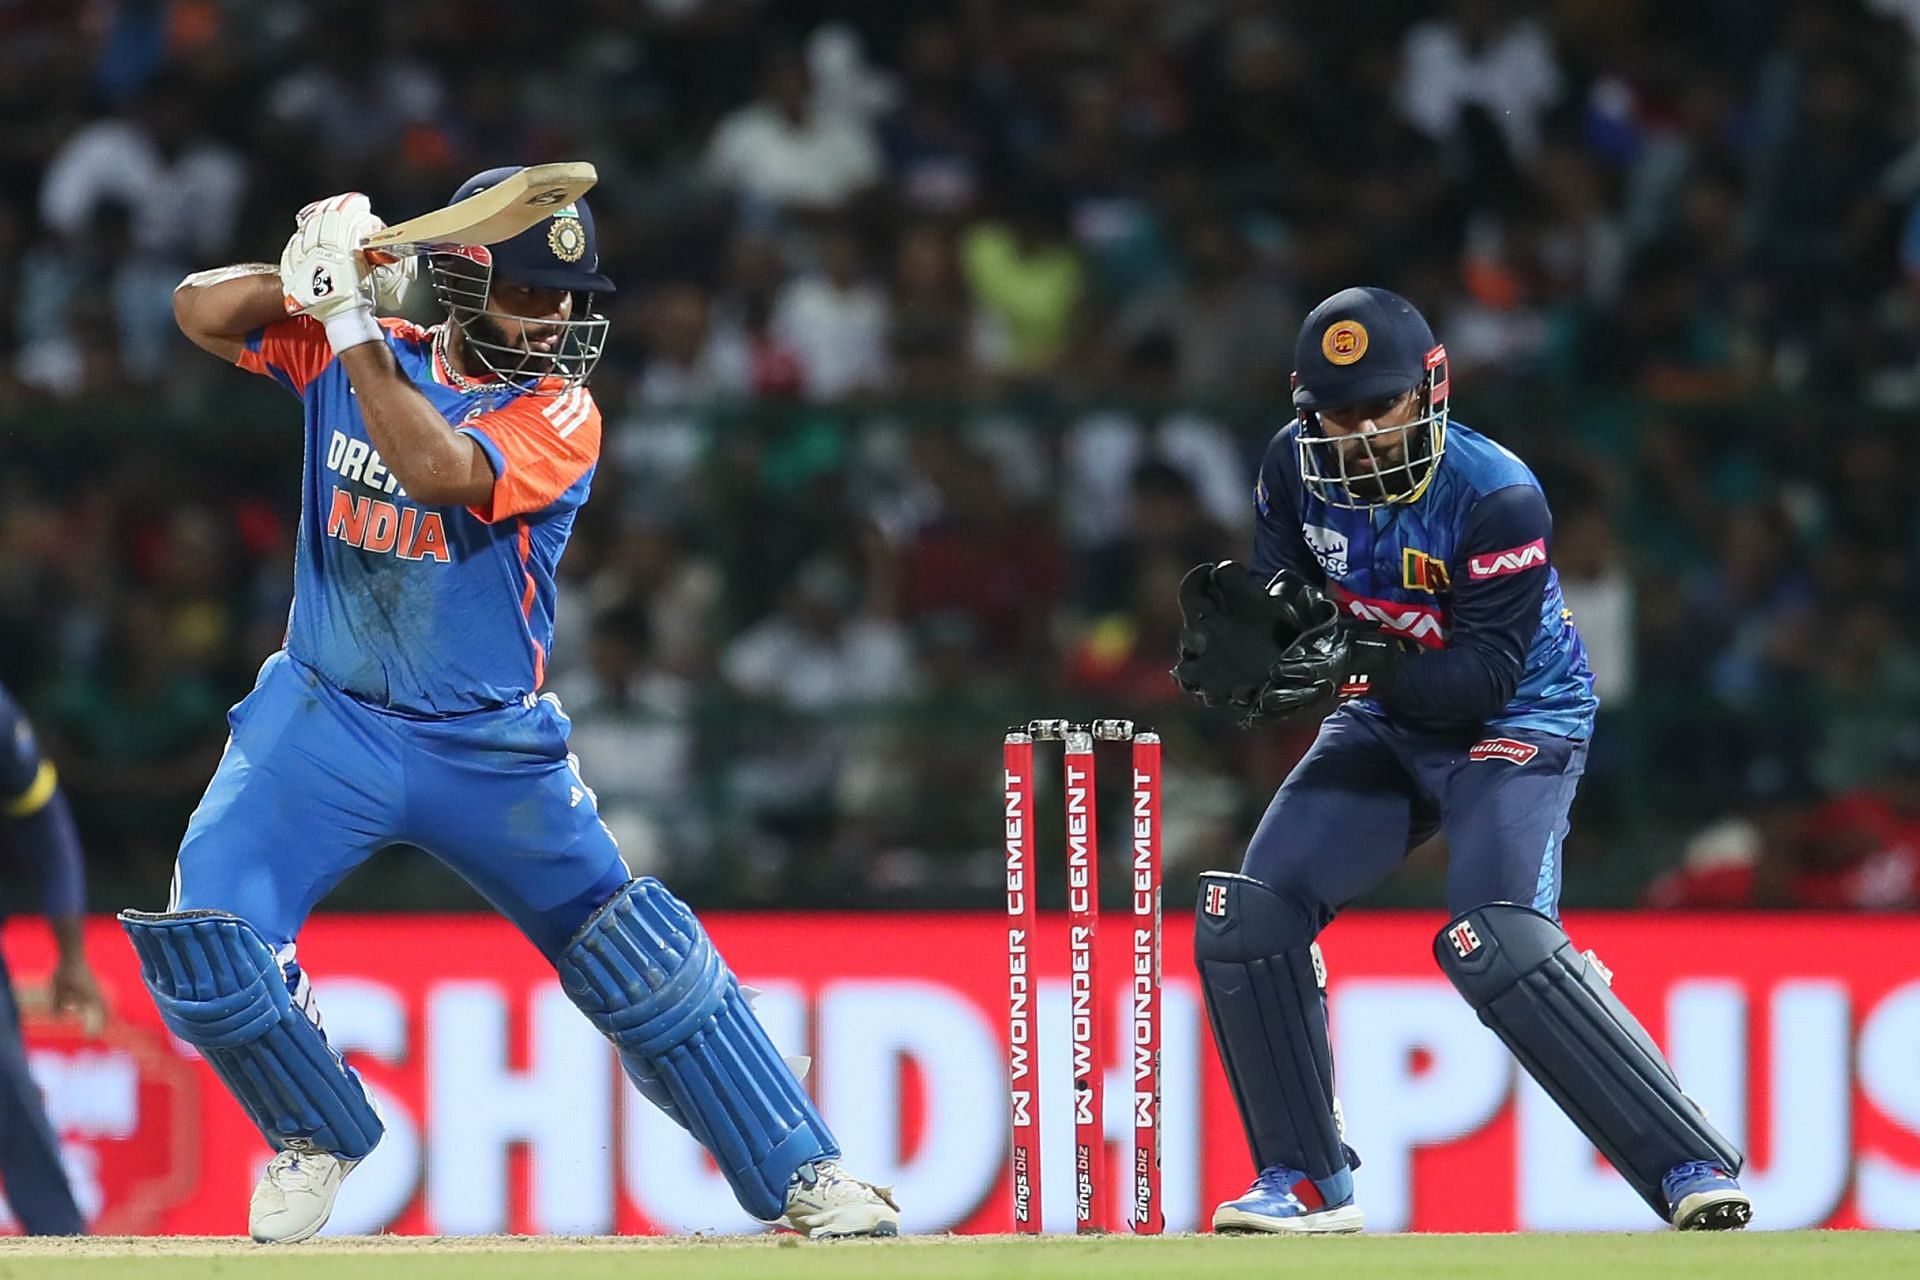 Sri Lanka vs India, 2nd T20I: Probable XI, Match Prediction, Pitch Report, Weather Forecast, and Live Streaming Details